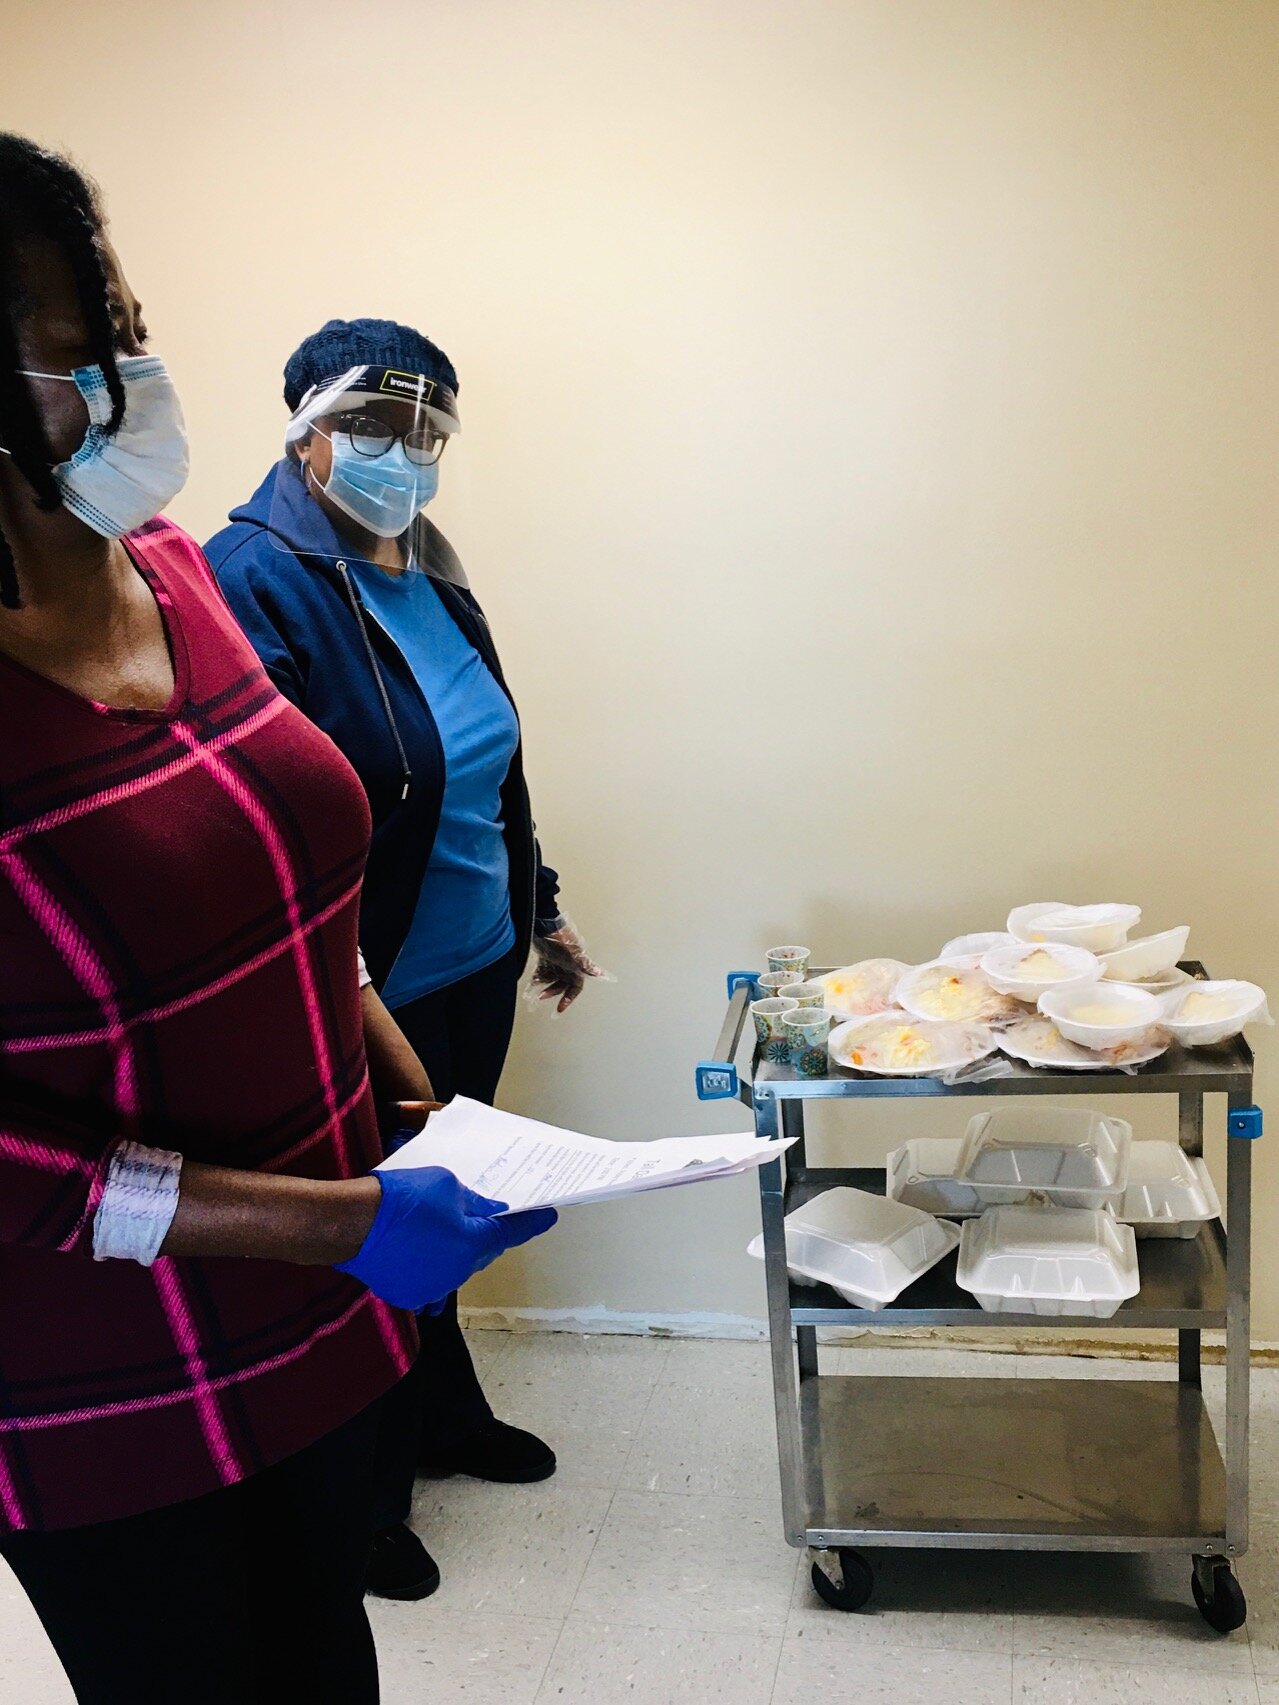 Since COVID made gathering hazardous, Tall Oaks tenant leaders have adapted and made sure their neighbors could get their home-cooked meals by taking pre-orders and delivering them in individual containers.